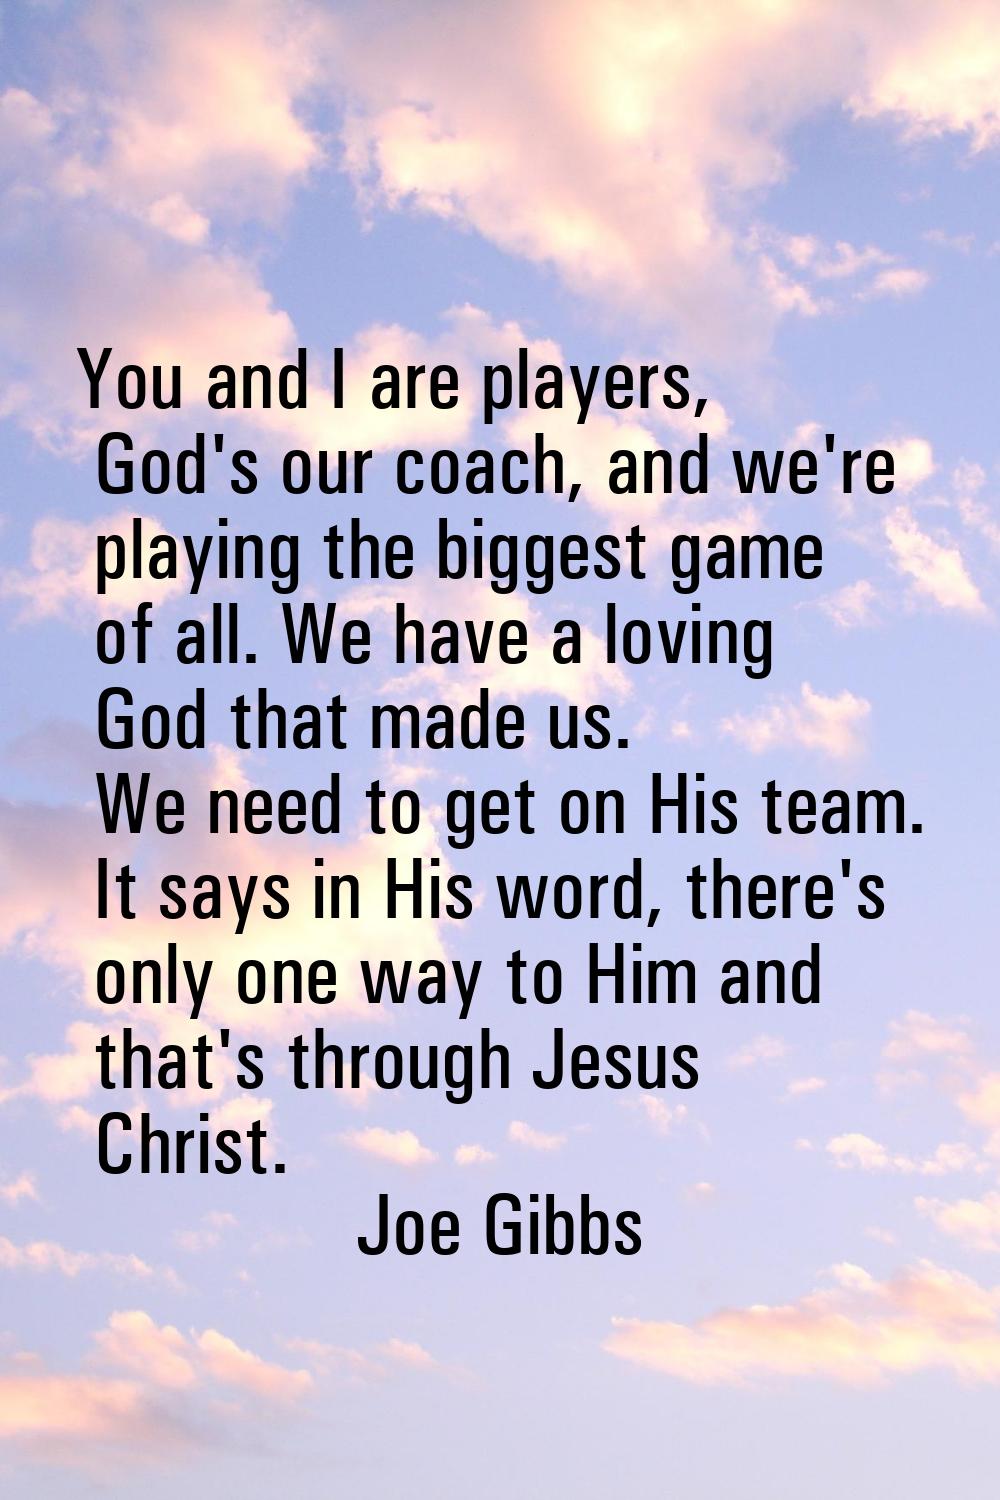 You and I are players, God's our coach, and we're playing the biggest game of all. We have a loving